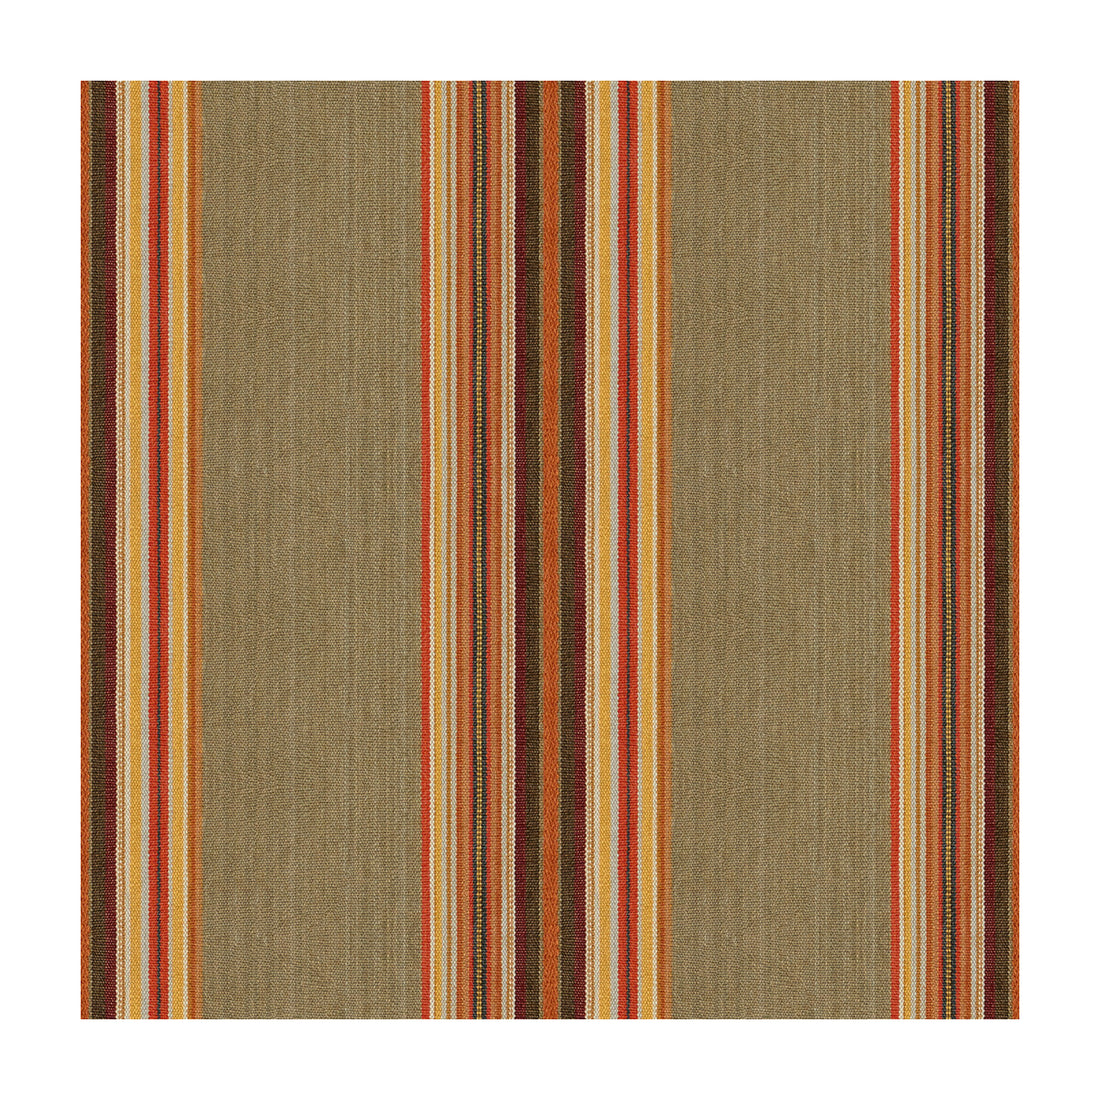 Gaban Stripe fabric in yam color - pattern 33808.416.0 - by Kravet Design in the Museum Of New Mexico collection